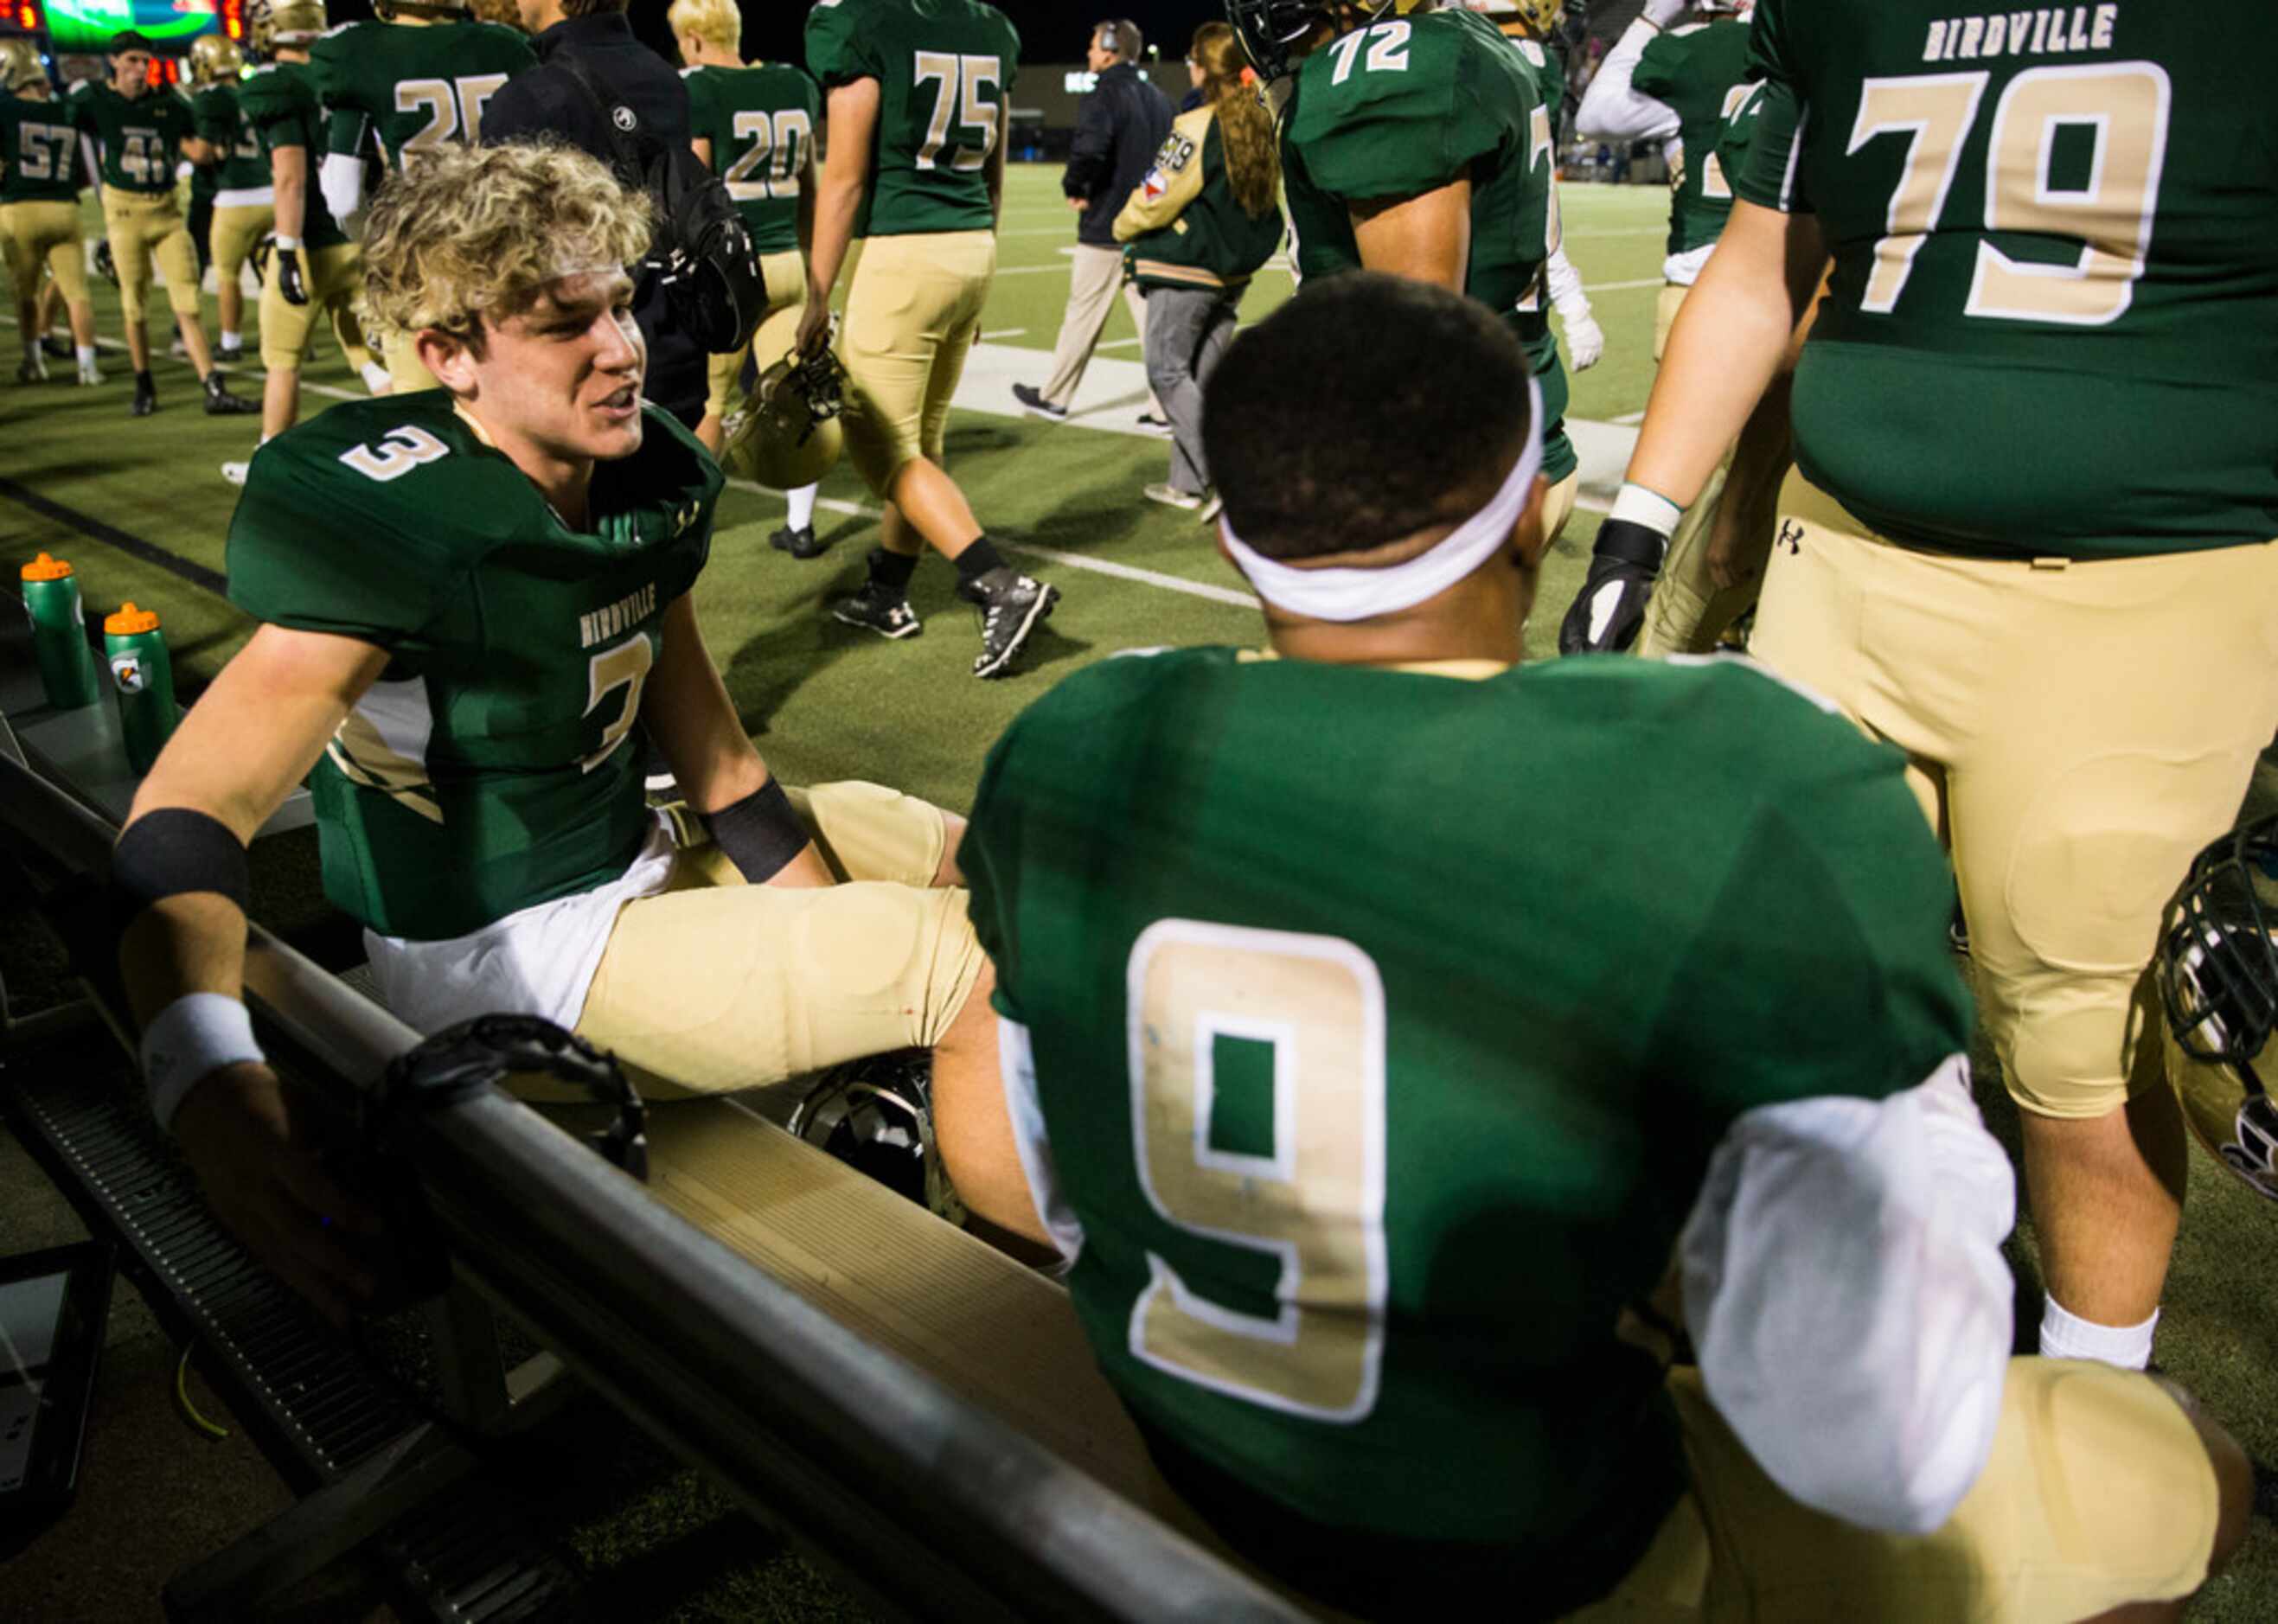 Birdville quarterback Stone Earle (3) talks with running back Laderrious Mixon (9) on the...